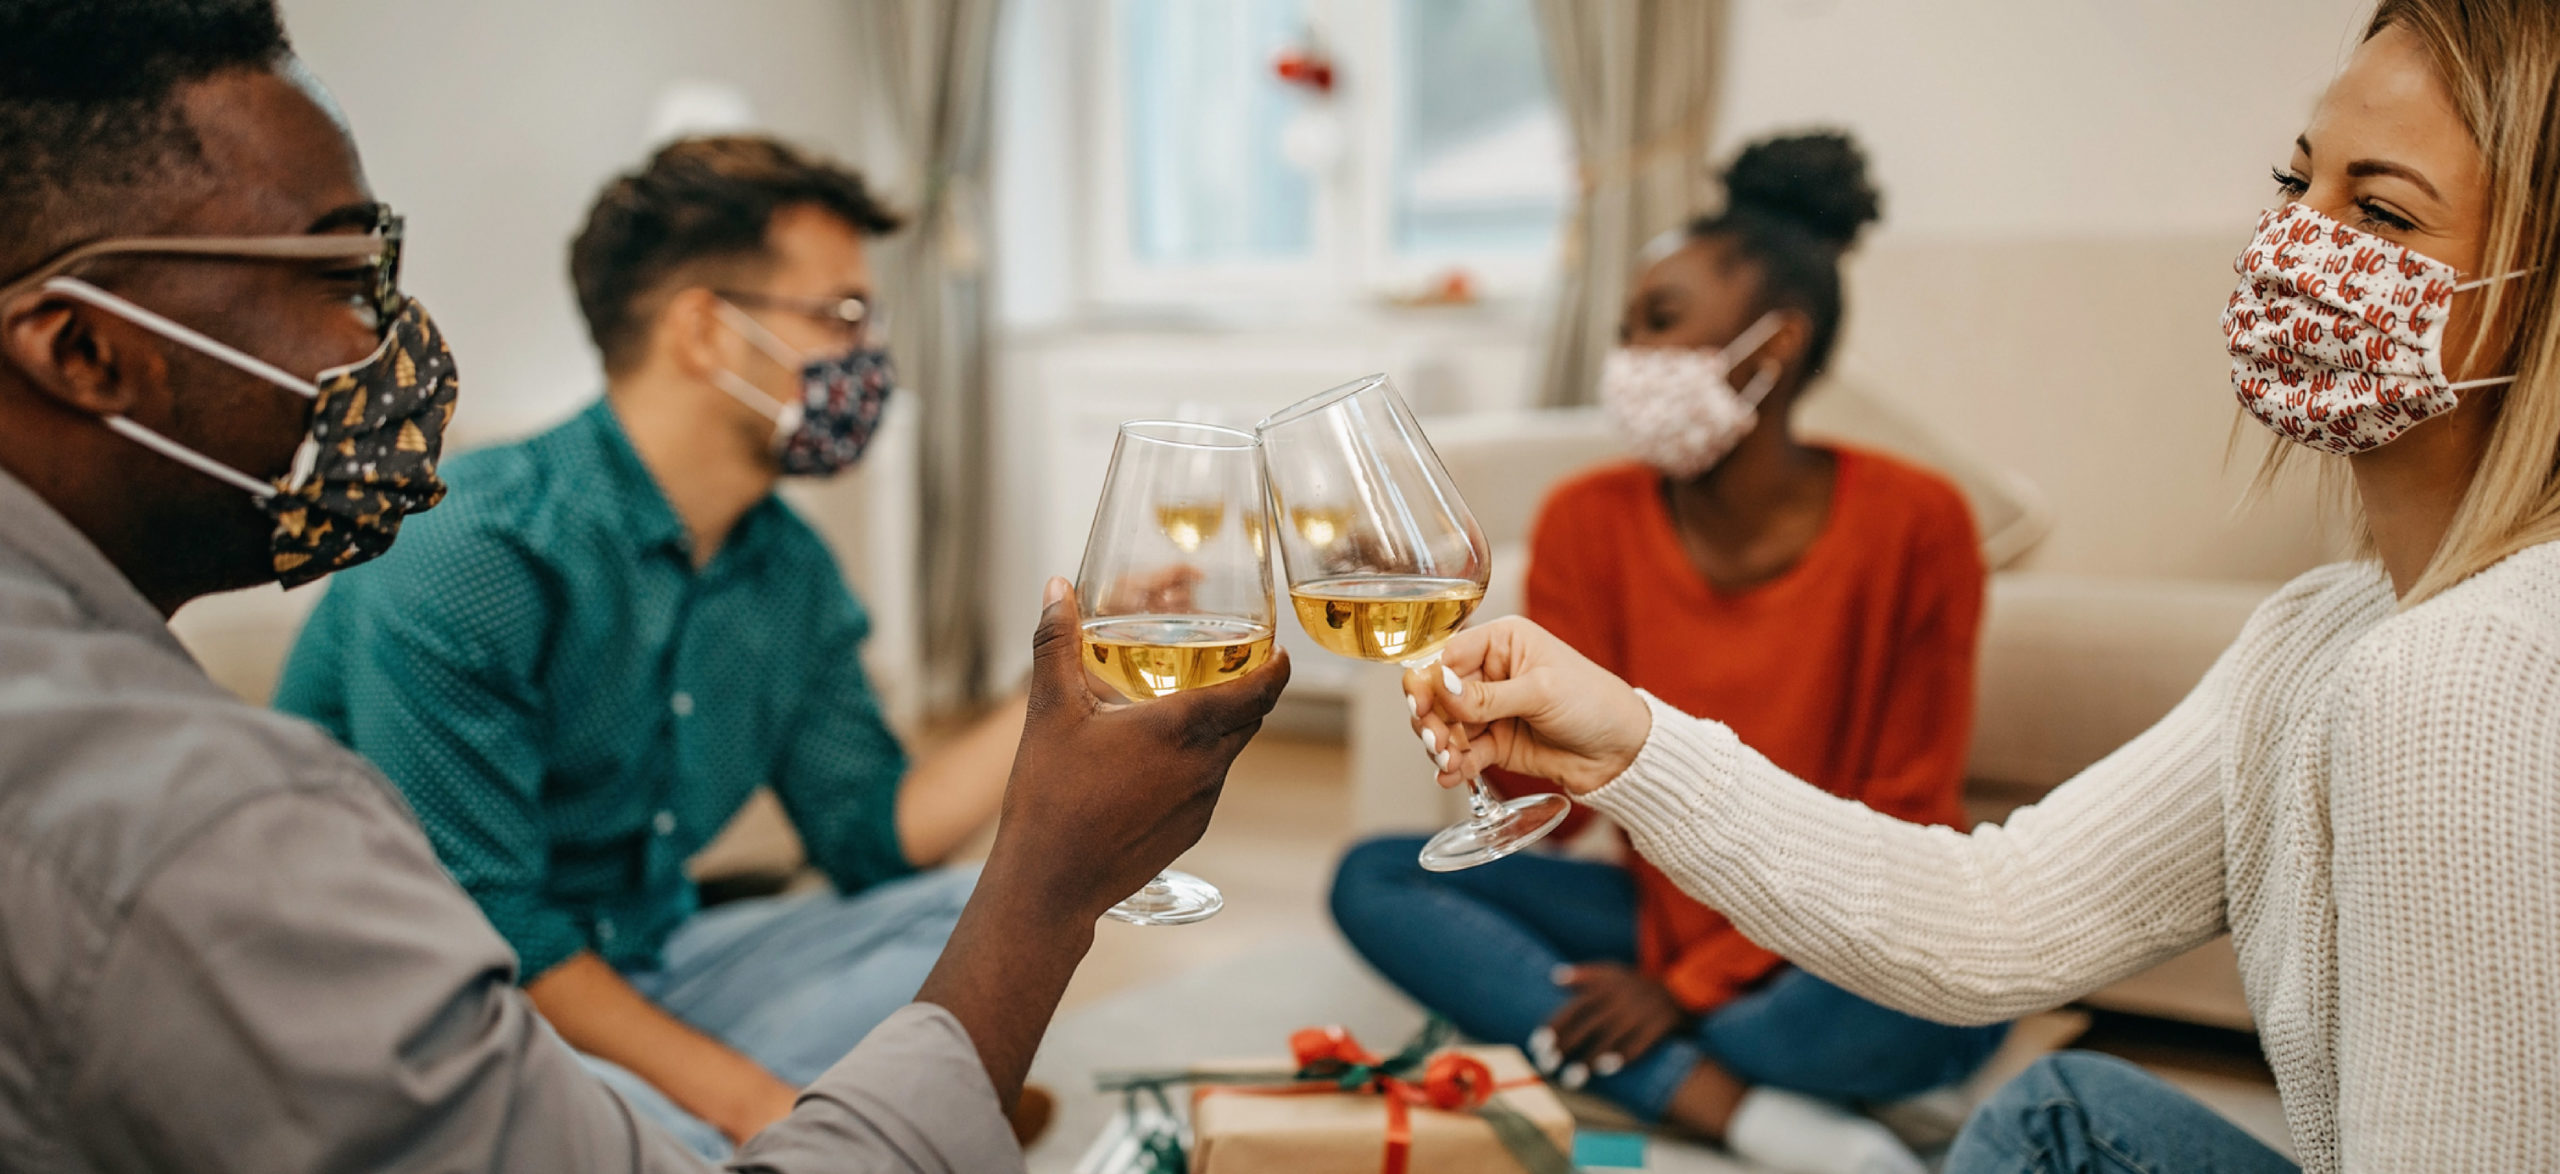 Four young people sharing glasses of wine and exchanging gifts